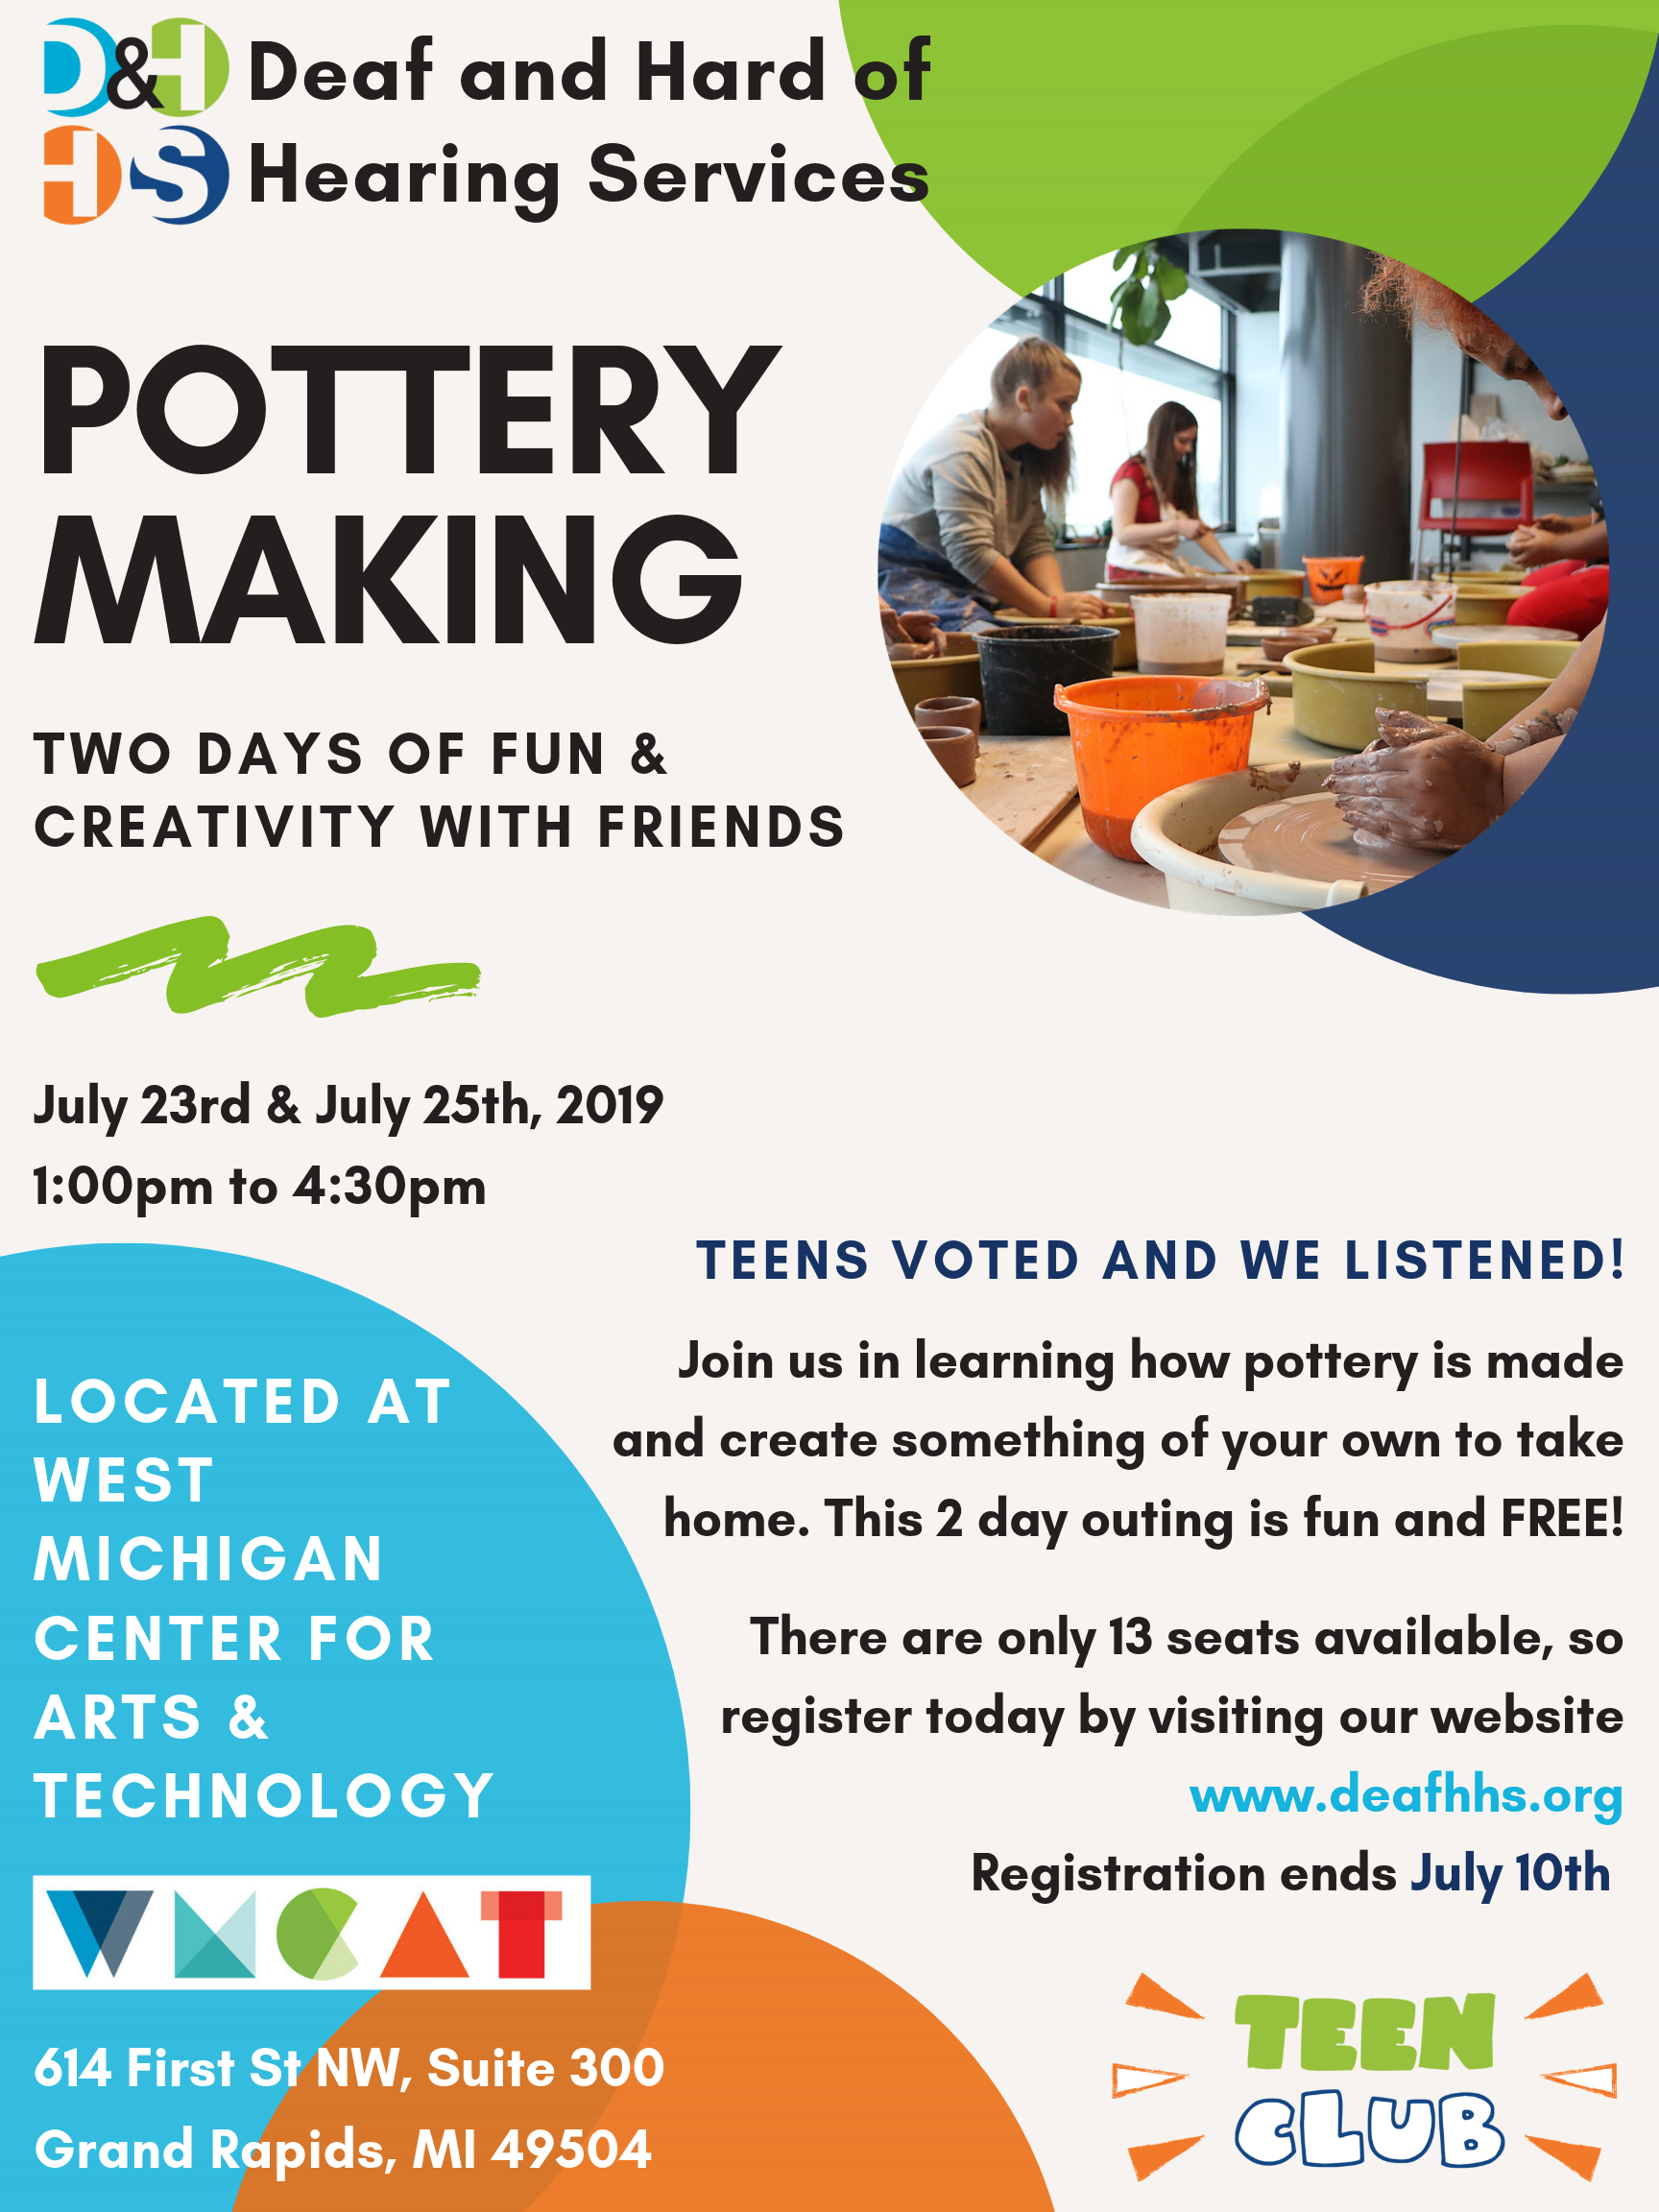 Flyer for teen club pottery details in description